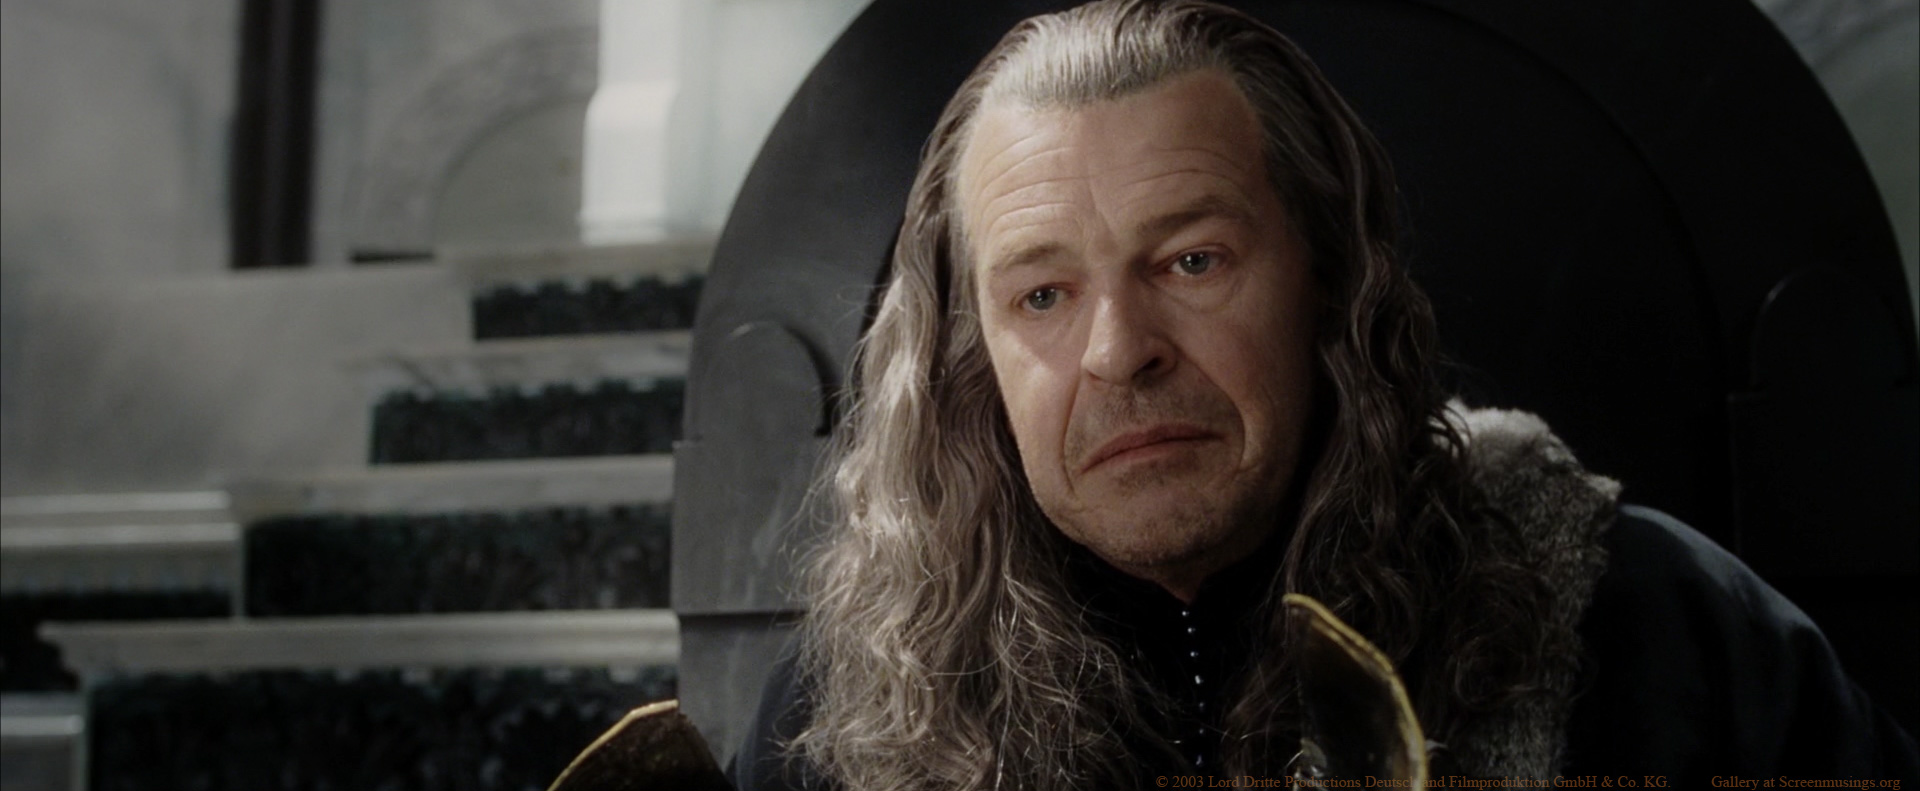 John Noble in The Lord of the Rings: The Return of the King